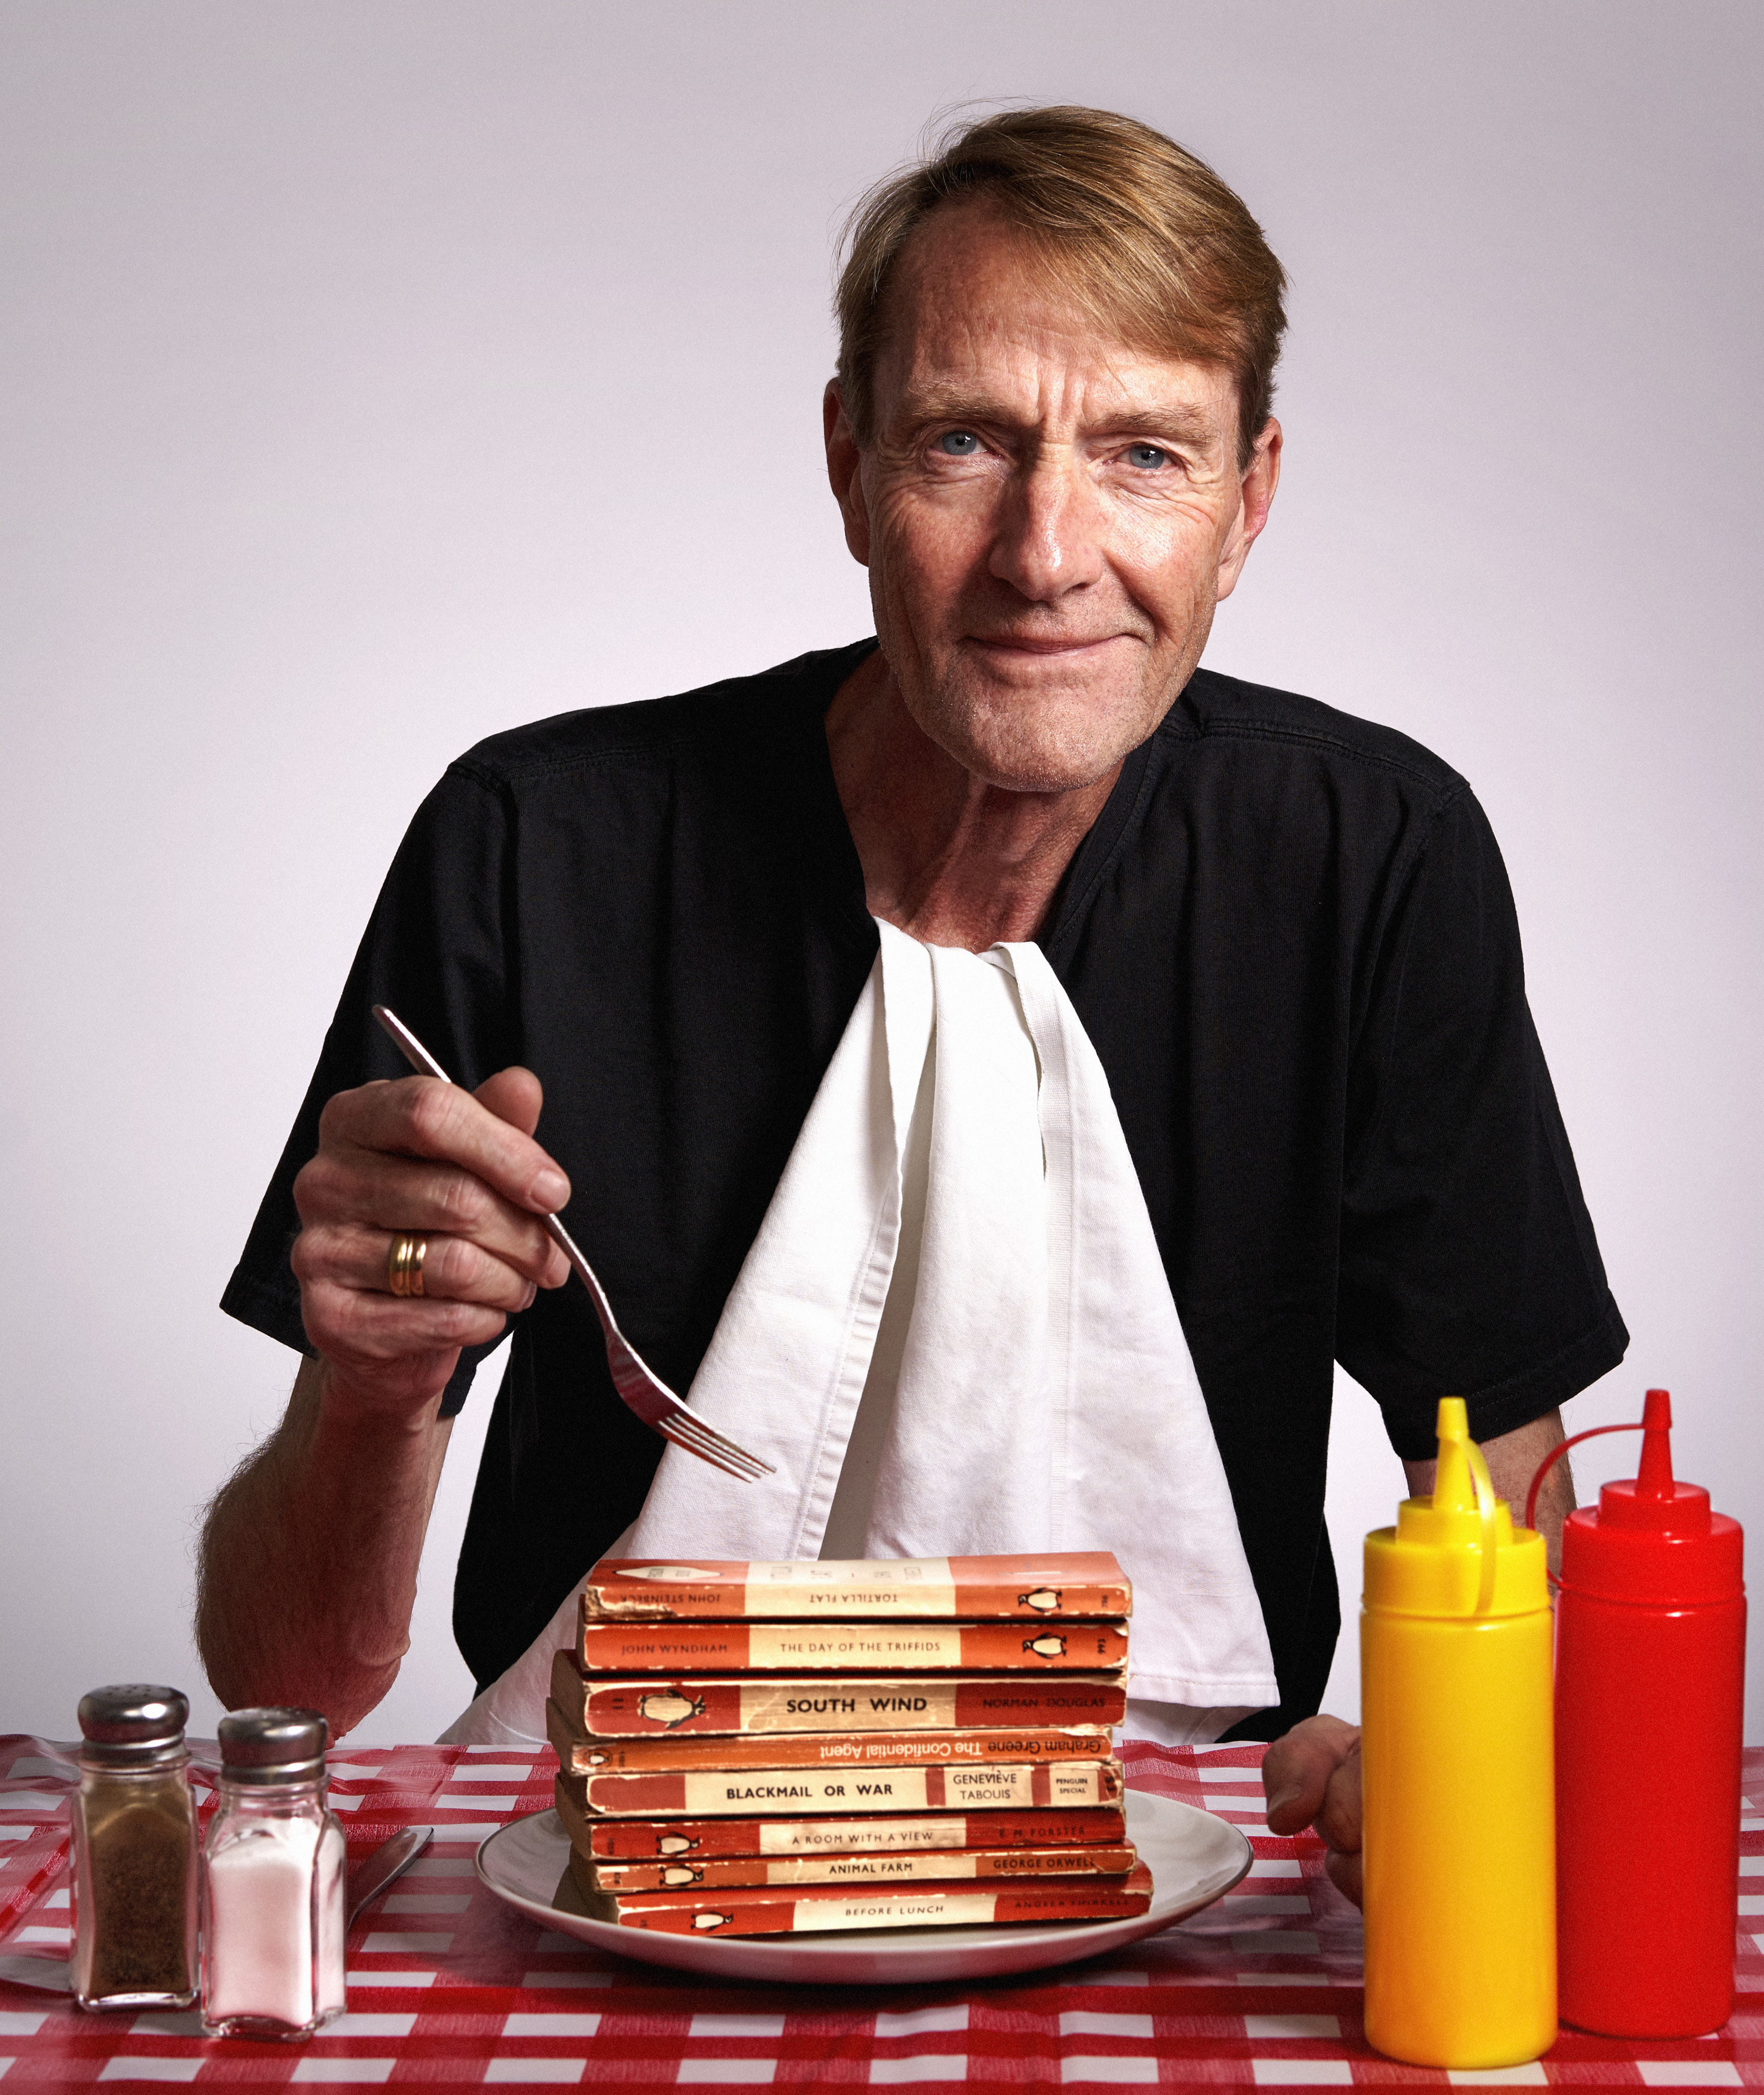 Lee Child with a balanced meal. Photo: Stuart Simpson for Penguin 2019